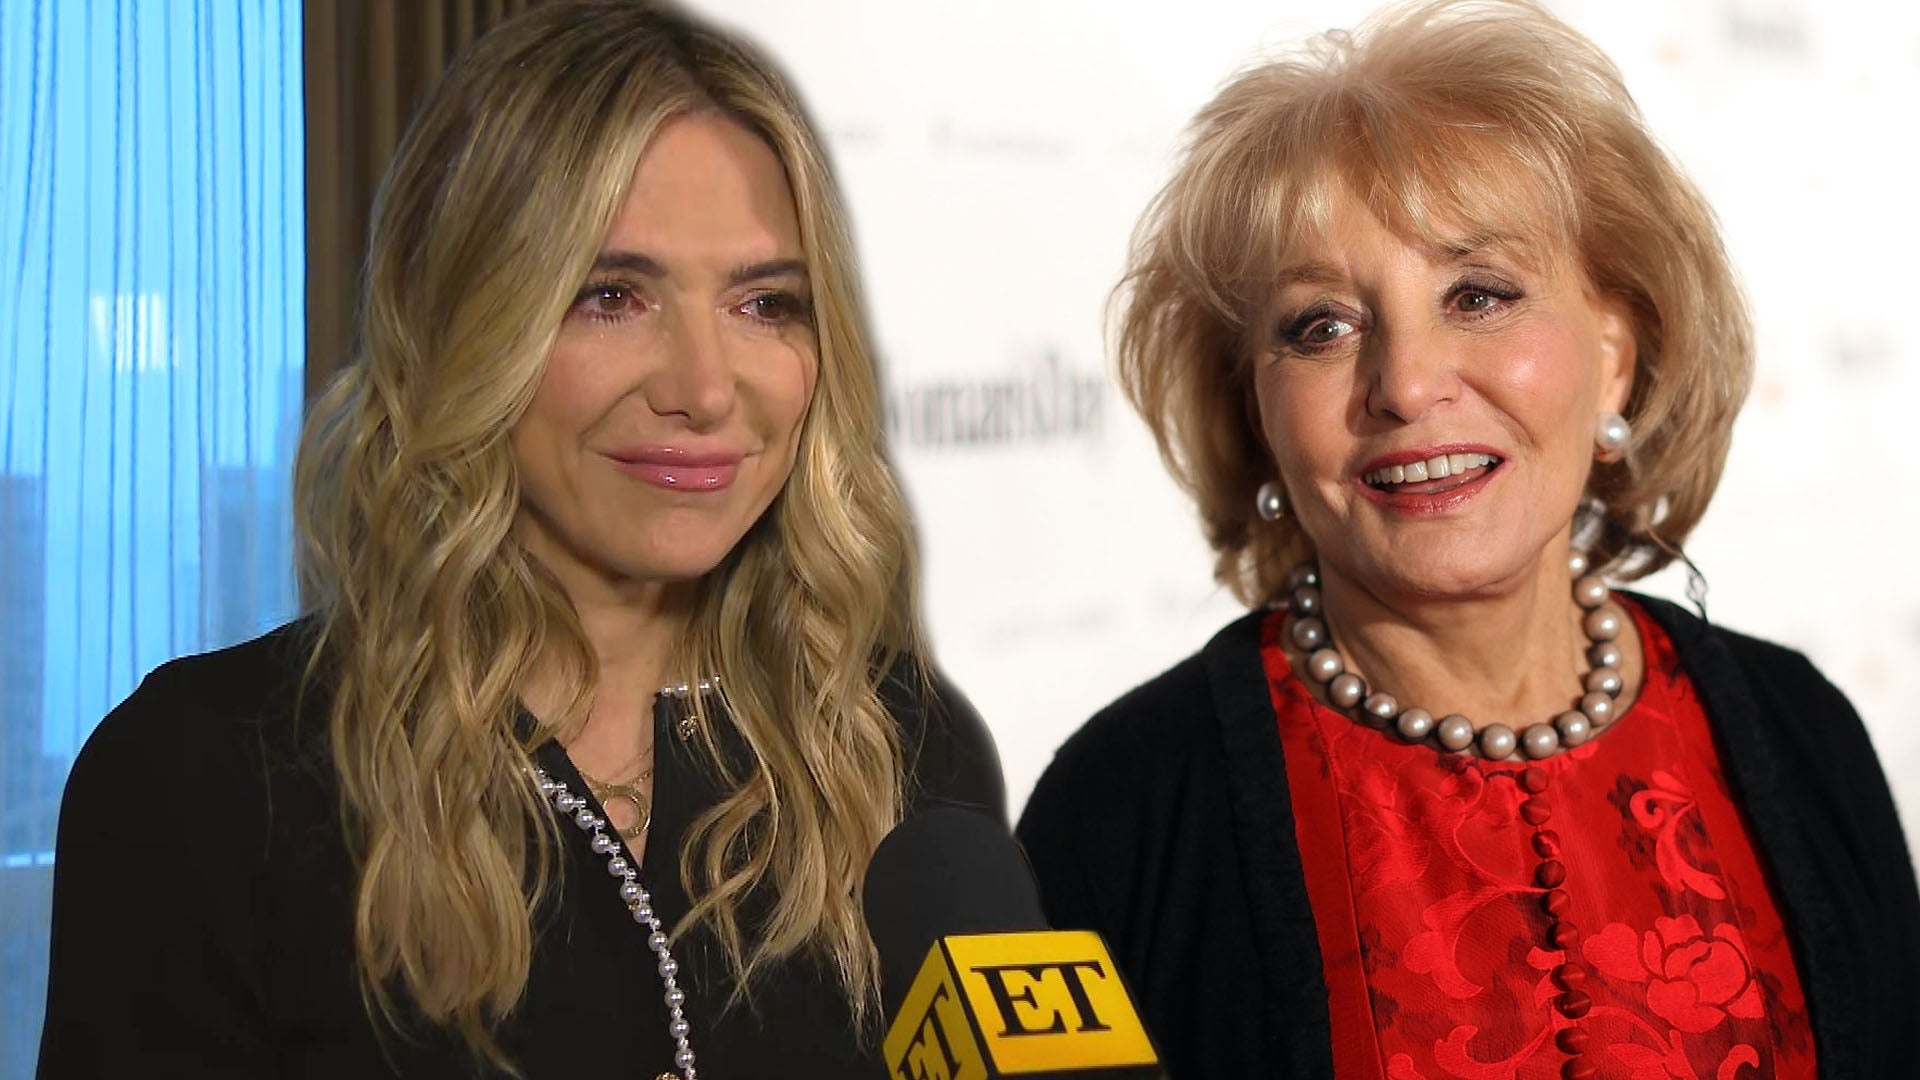 Debbie Matenopoulos Tears Up Sharing Barbara Walters' Final Words to Her (Exclusive)